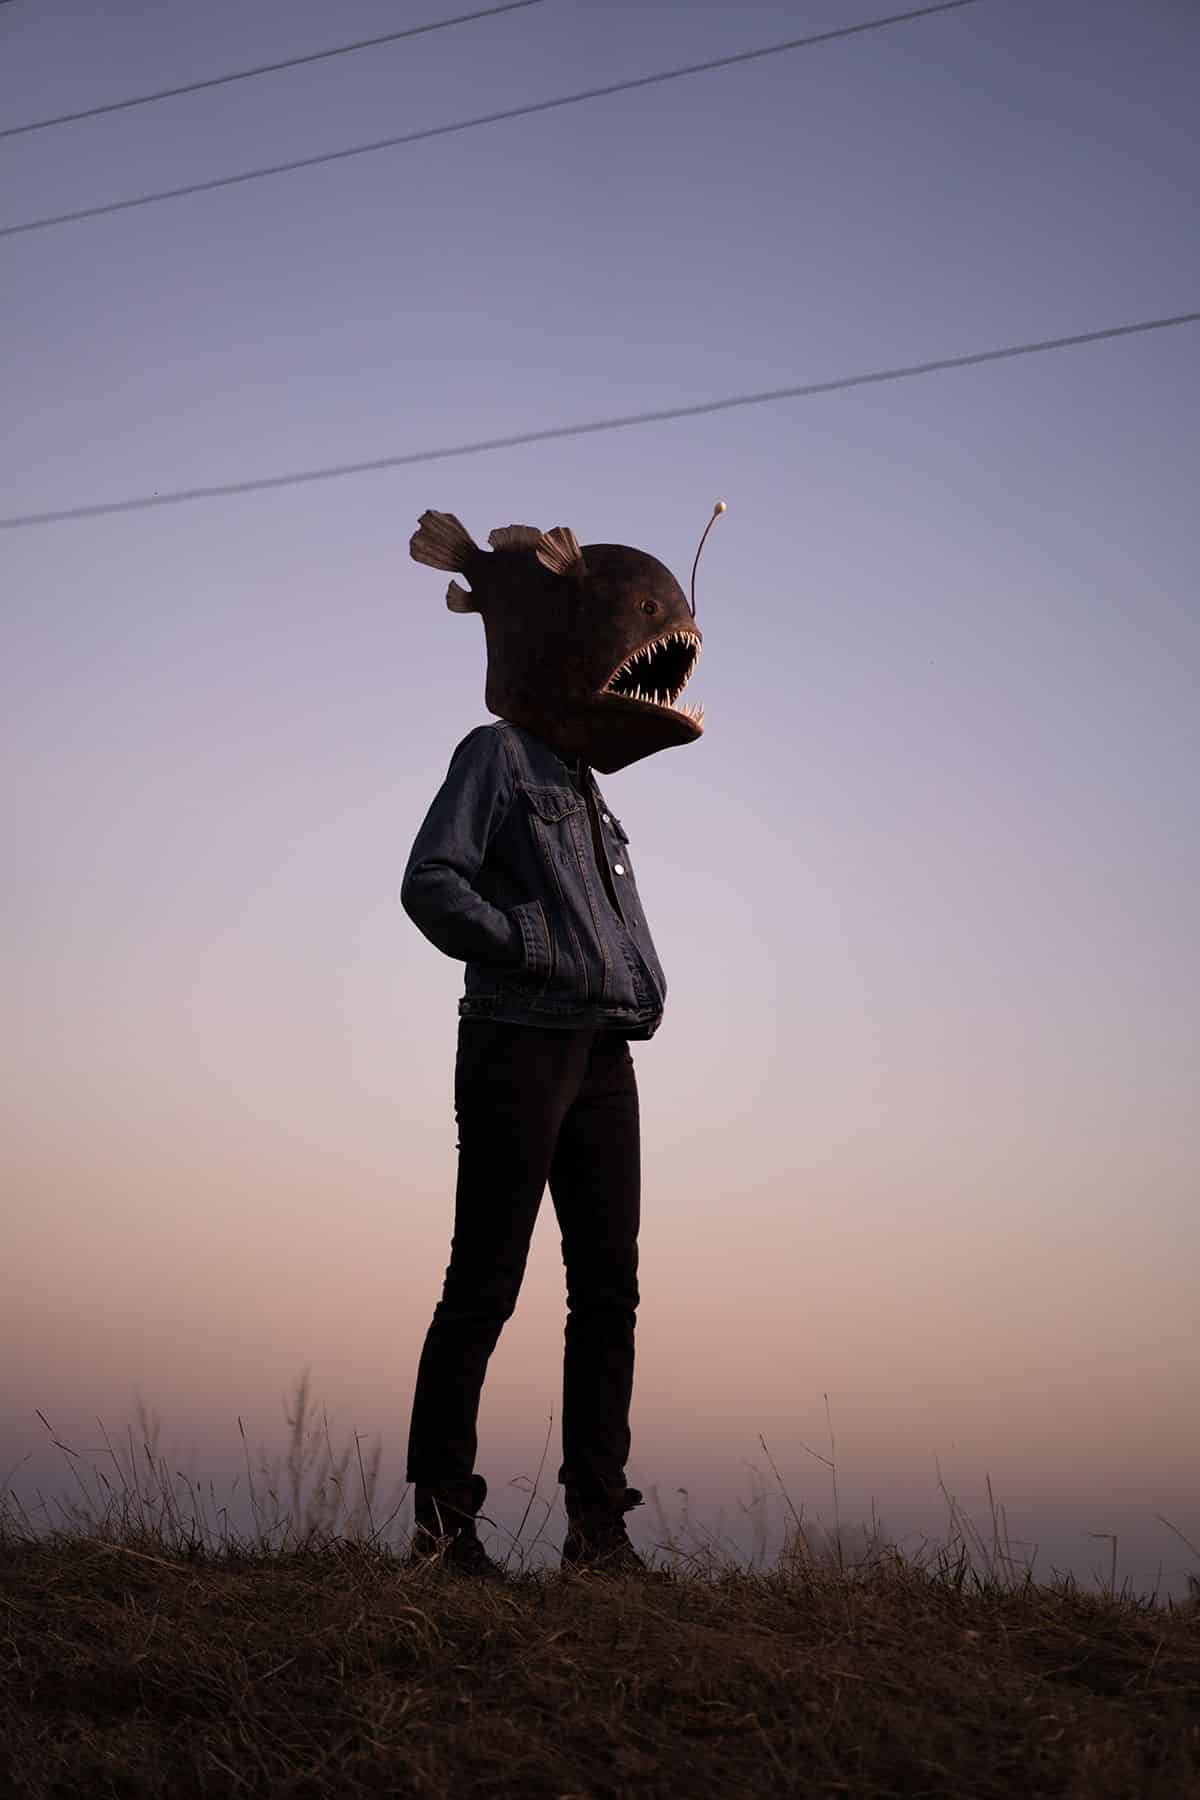 A person wearing a denim jacket at dusk with an angler fish head over their head